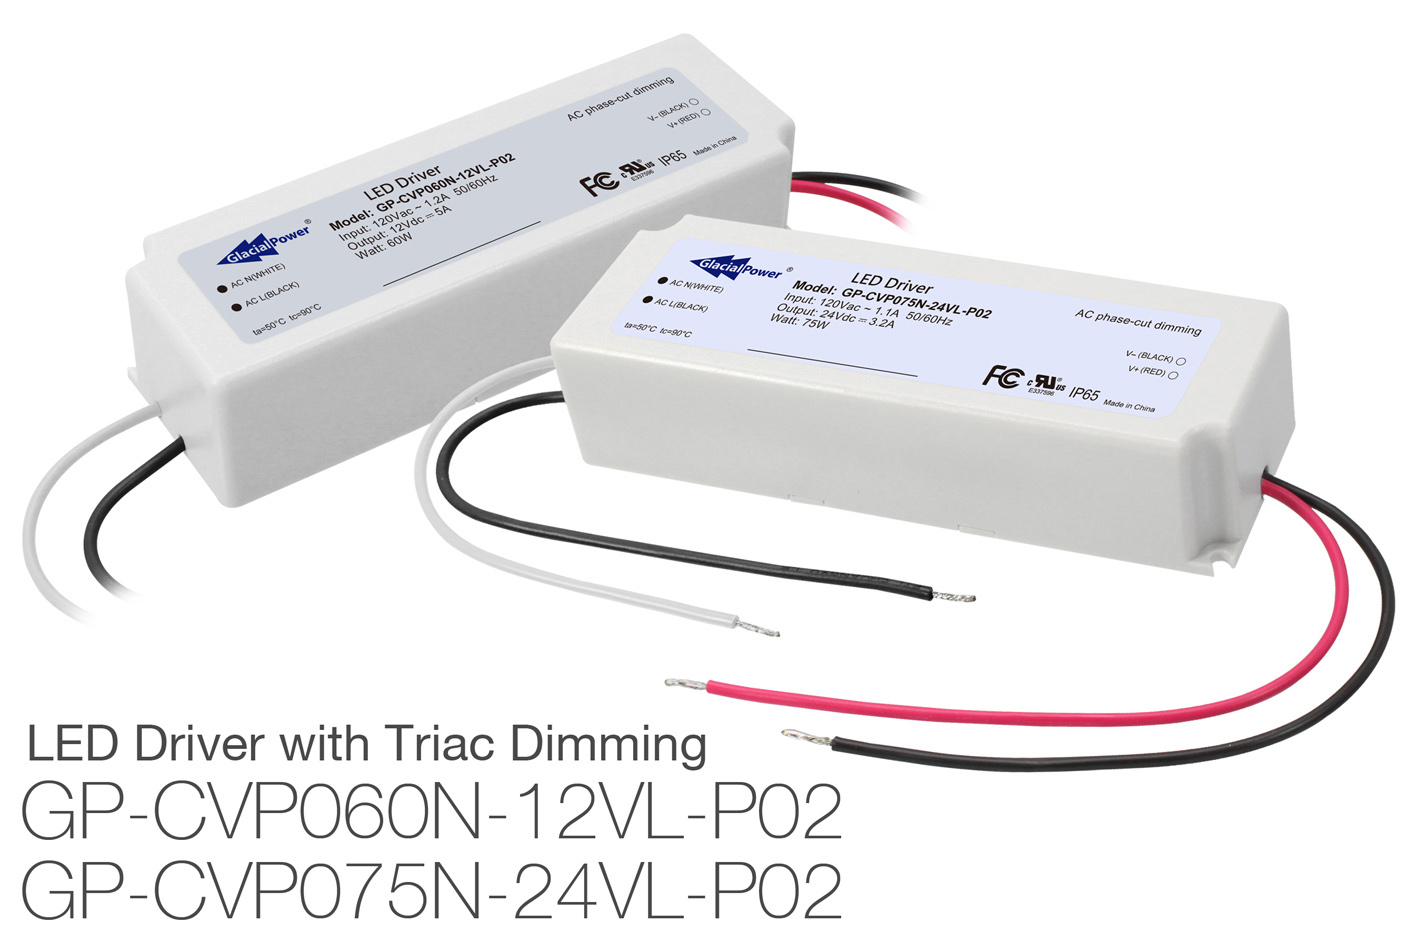 GlacialPower Launches GP-CVP060N-12VL and GP-CVP075N-24VL LED Constant Voltage TRIAC Dimming Drivers for Low Voltage Areas